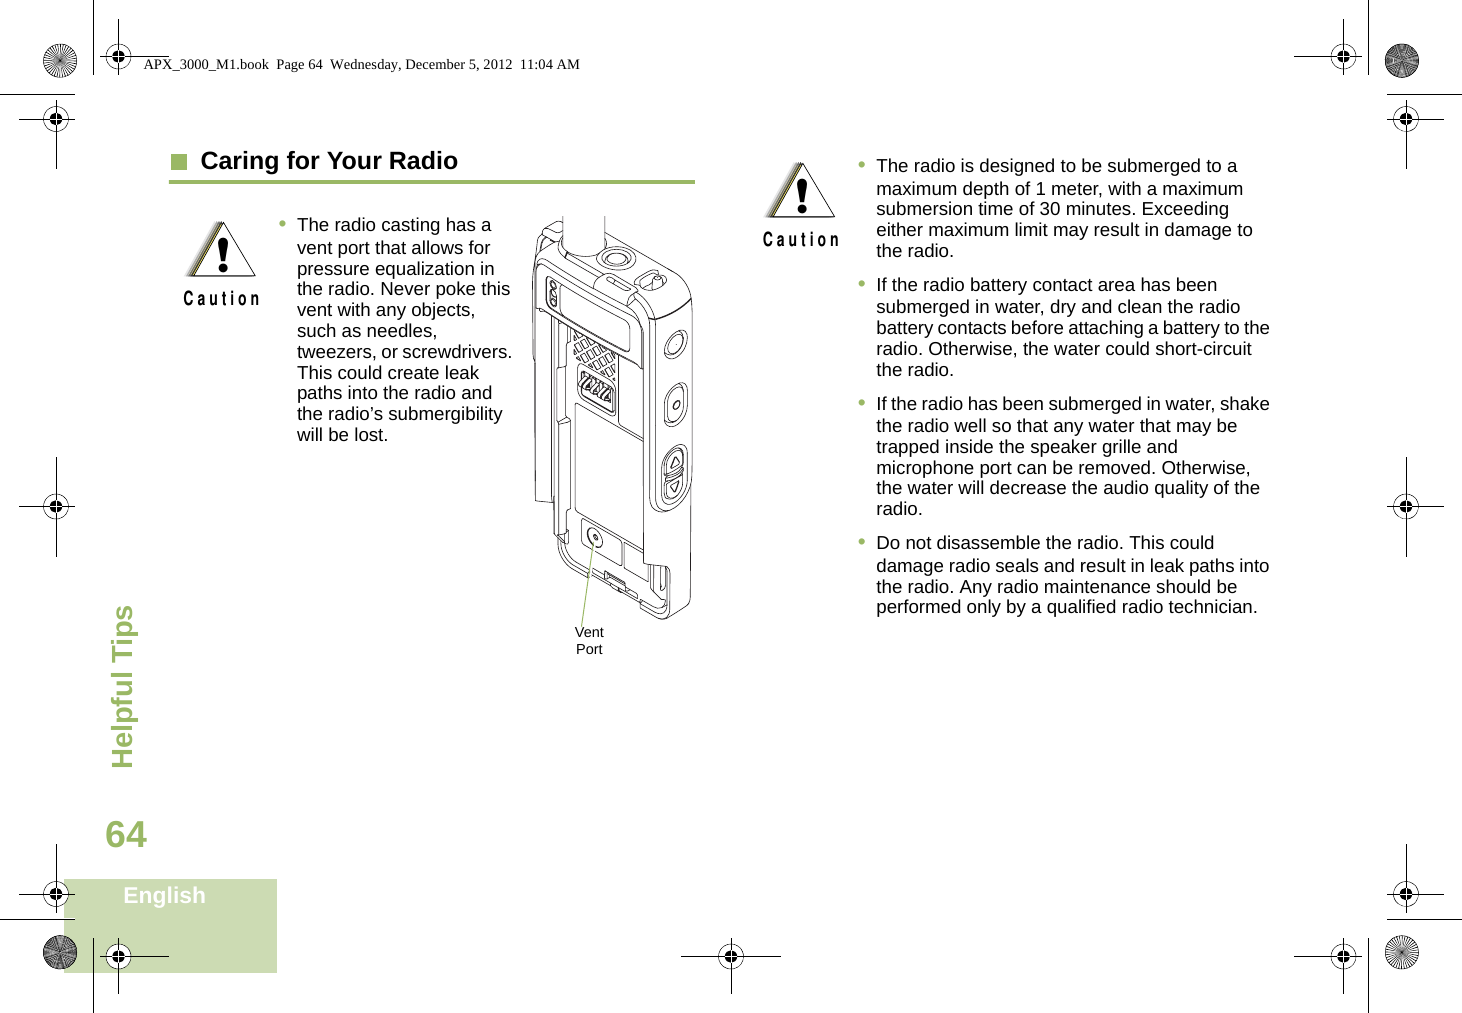 Helpful TipsEnglish64  Caring for Your Radio•The radio casting has a vent port that allows for pressure equalization in the radio. Never poke this vent with any objects, such as needles, tweezers, or screwdrivers. This could create leak paths into the radio and the radio’s submergibility will be lost. !C a u t i o nVent Port•The radio is designed to be submerged to a maximum depth of 1 meter, with a maximum submersion time of 30 minutes. Exceeding either maximum limit may result in damage to the radio.•If the radio battery contact area has been submerged in water, dry and clean the radio battery contacts before attaching a battery to the radio. Otherwise, the water could short-circuit the radio.•If the radio has been submerged in water, shake the radio well so that any water that may be trapped inside the speaker grille and microphone port can be removed. Otherwise, the water will decrease the audio quality of the radio.•Do not disassemble the radio. This could damage radio seals and result in leak paths into the radio. Any radio maintenance should be performed only by a qualified radio technician.!C a u t i o nAPX_3000_M1.book  Page 64  Wednesday, December 5, 2012  11:04 AM